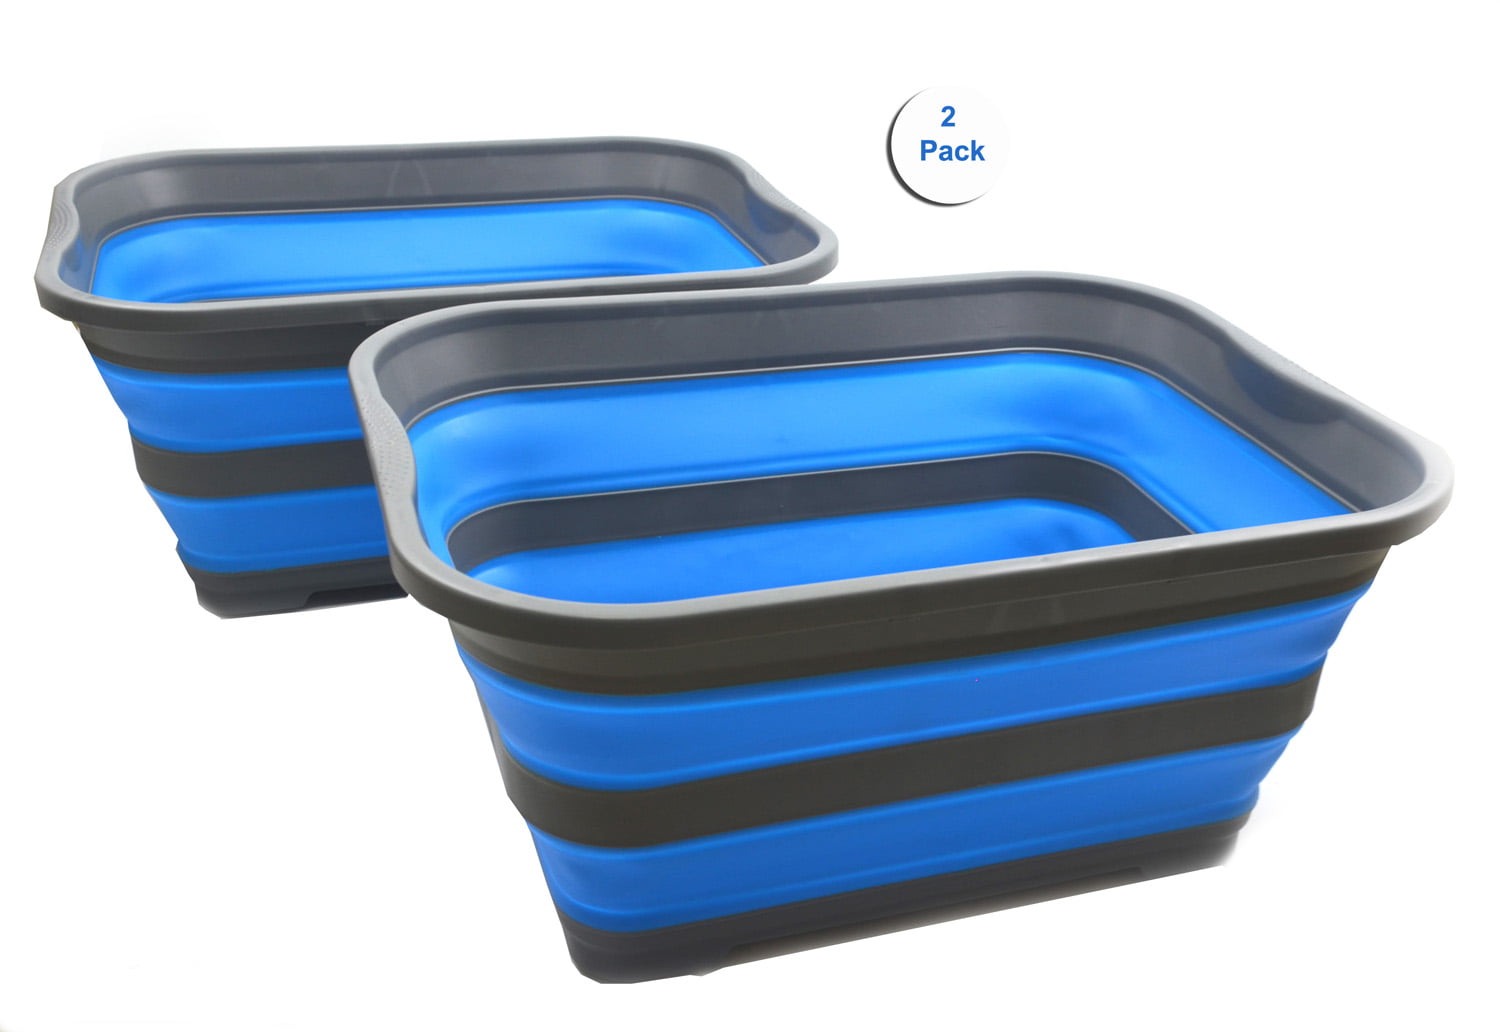 Laundry Basket Collapsible Plastic Foldable Pop Up Storage Container Washing Tub 